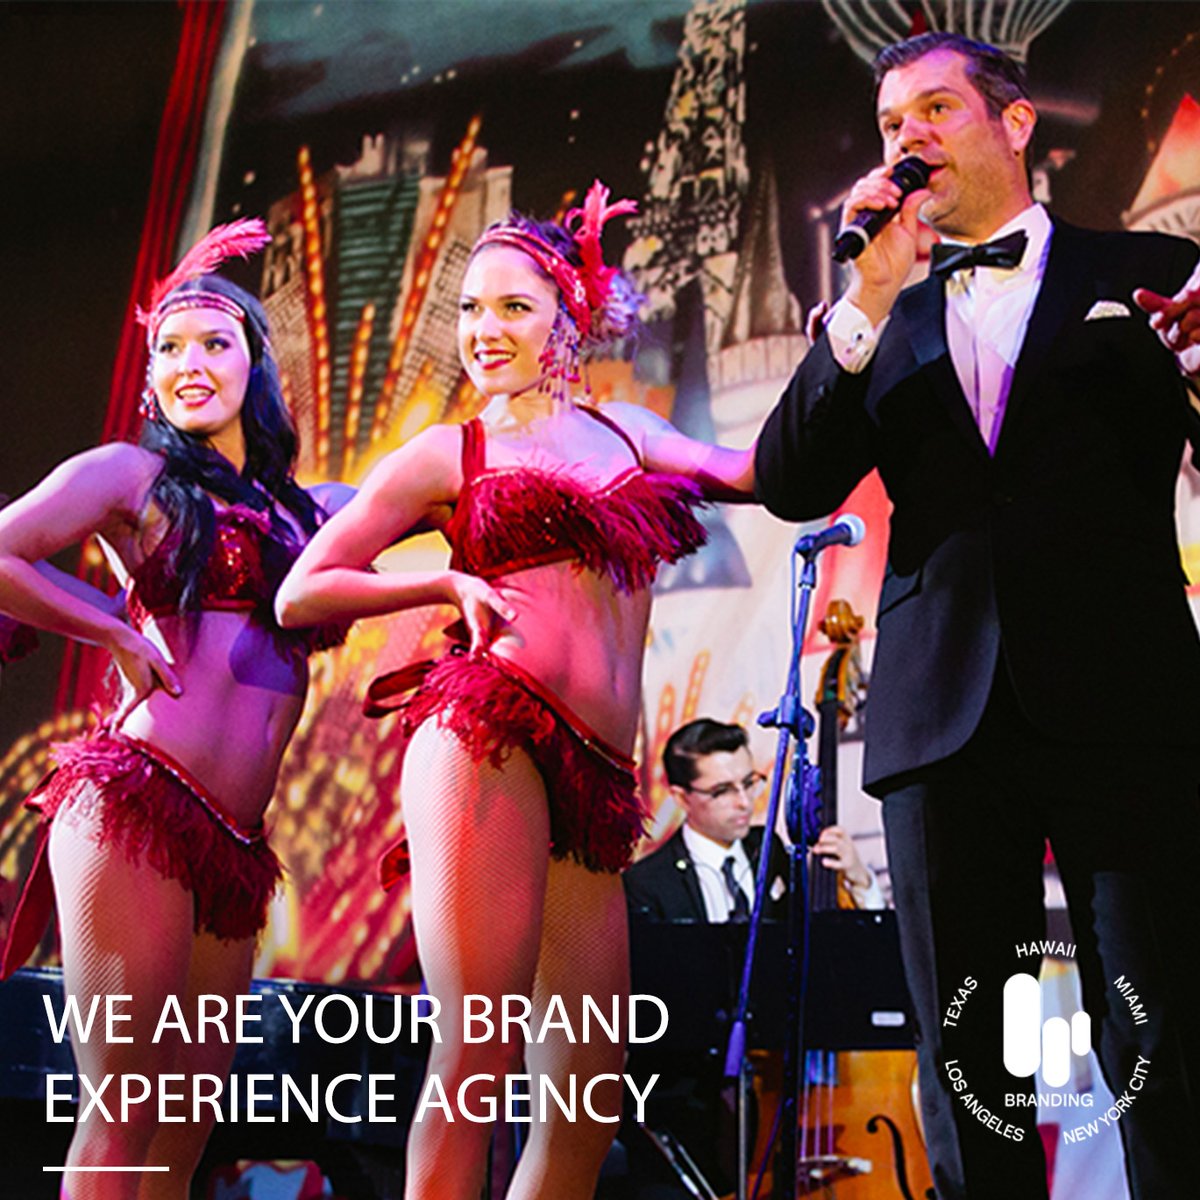 Elevate your brand with Branding Los Angeles! As your go-to experiential marketing agency, we're dedicated to driving excellence and building brand love. Let's create unforgettable experiences together #BrandLove #ExperientialMarketing #BrandingLosAngeles bit.ly/4dyhjlI